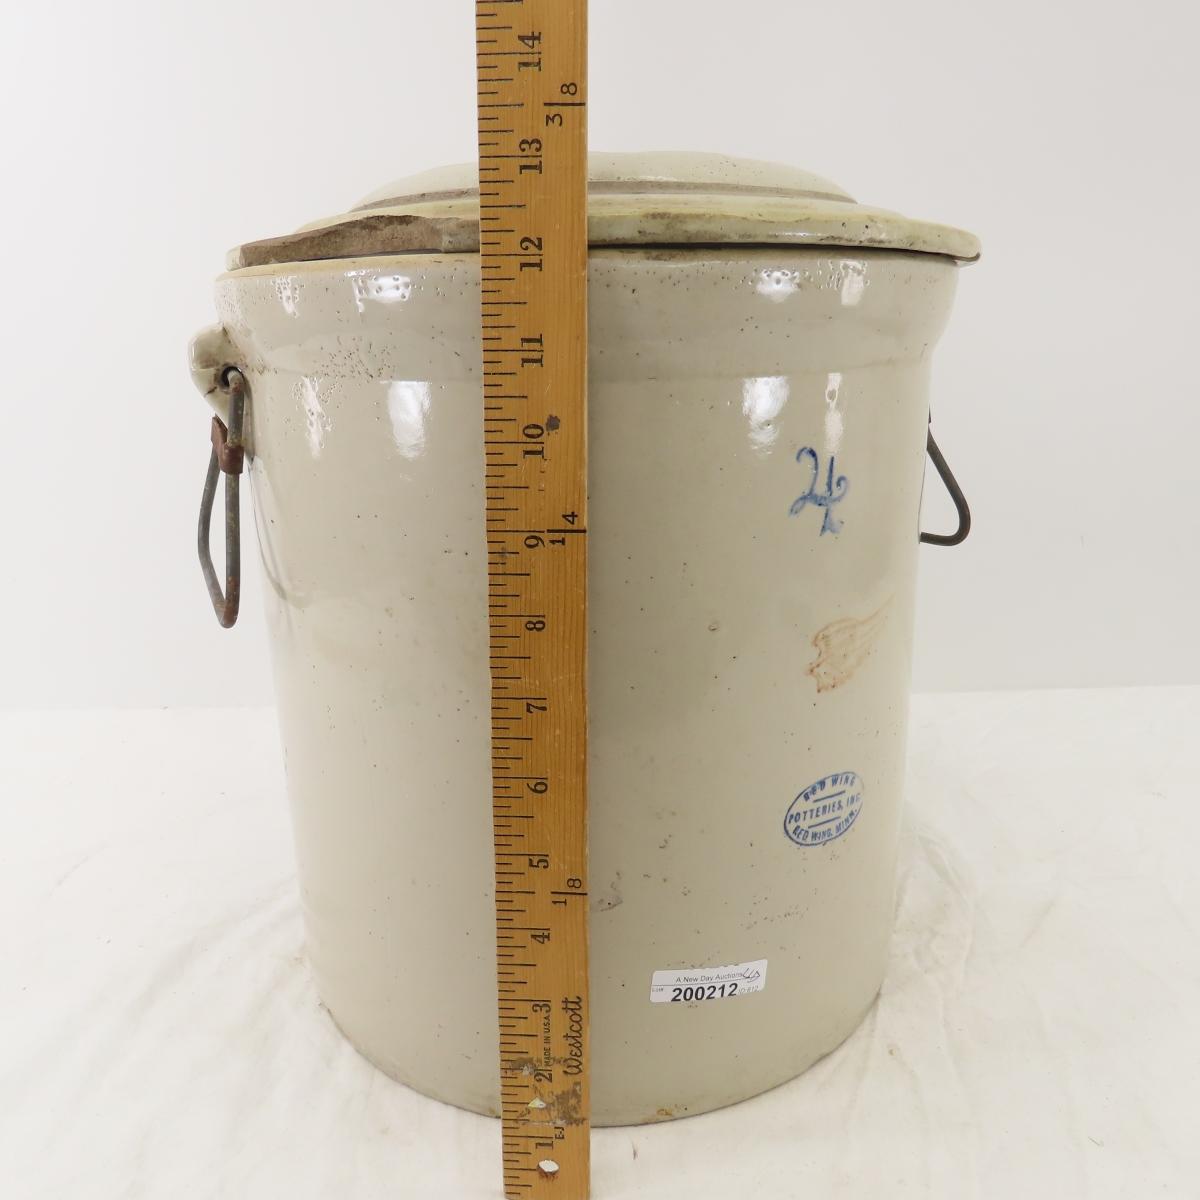 4 gallon Red Wing Potteries Small Wing Crock & Lid